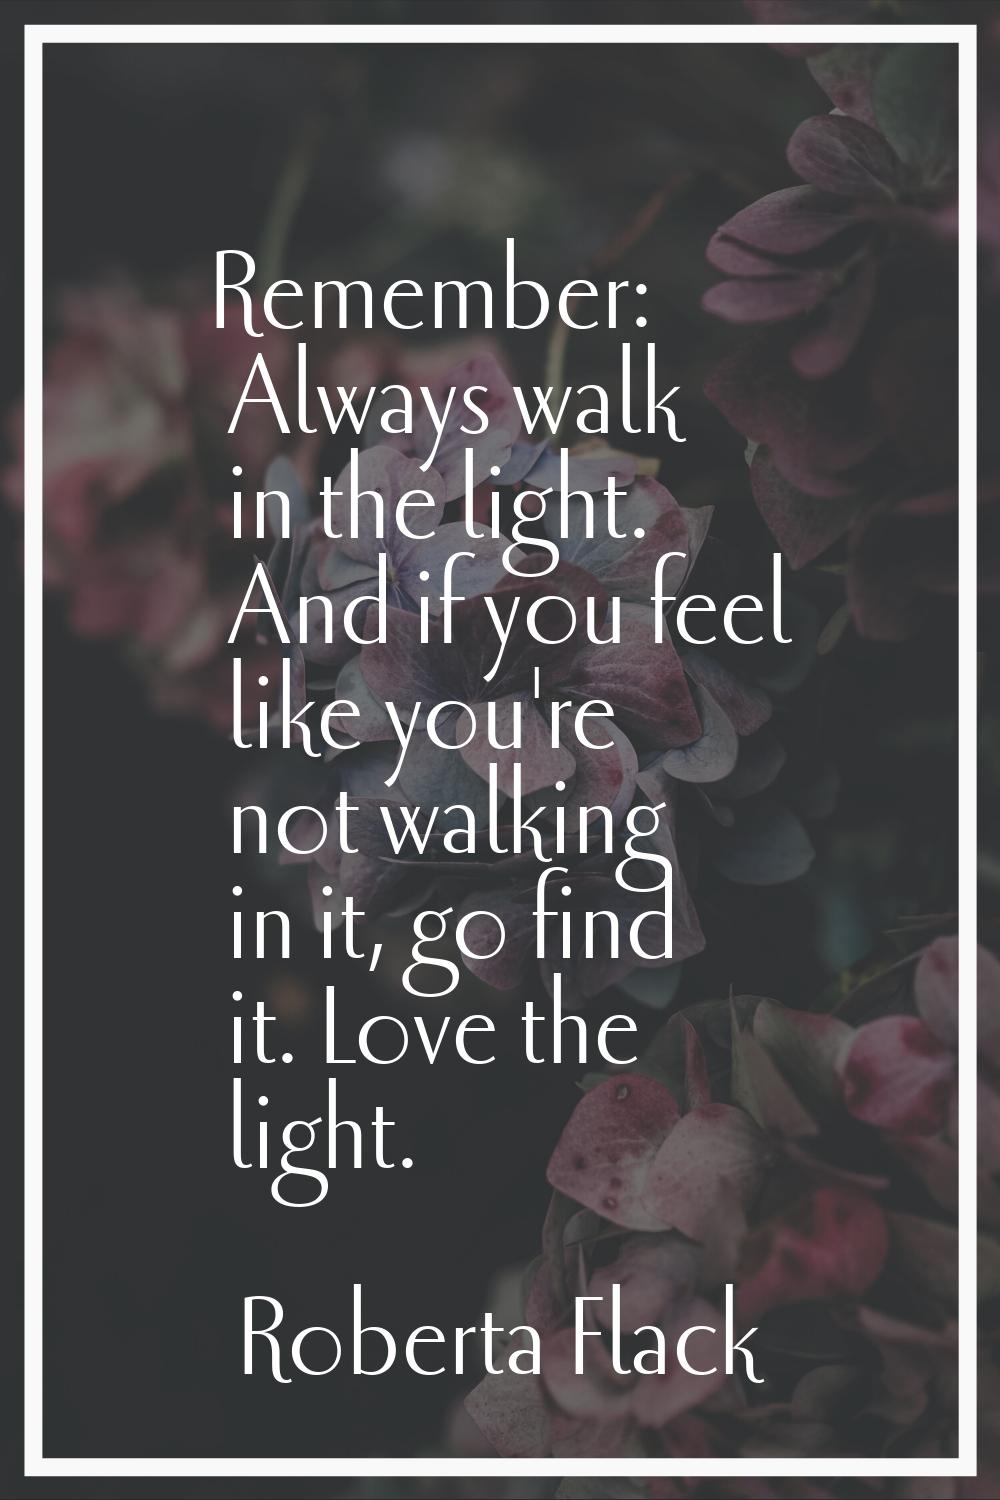 Remember: Always walk in the light. And if you feel like you're not walking in it, go find it. Love